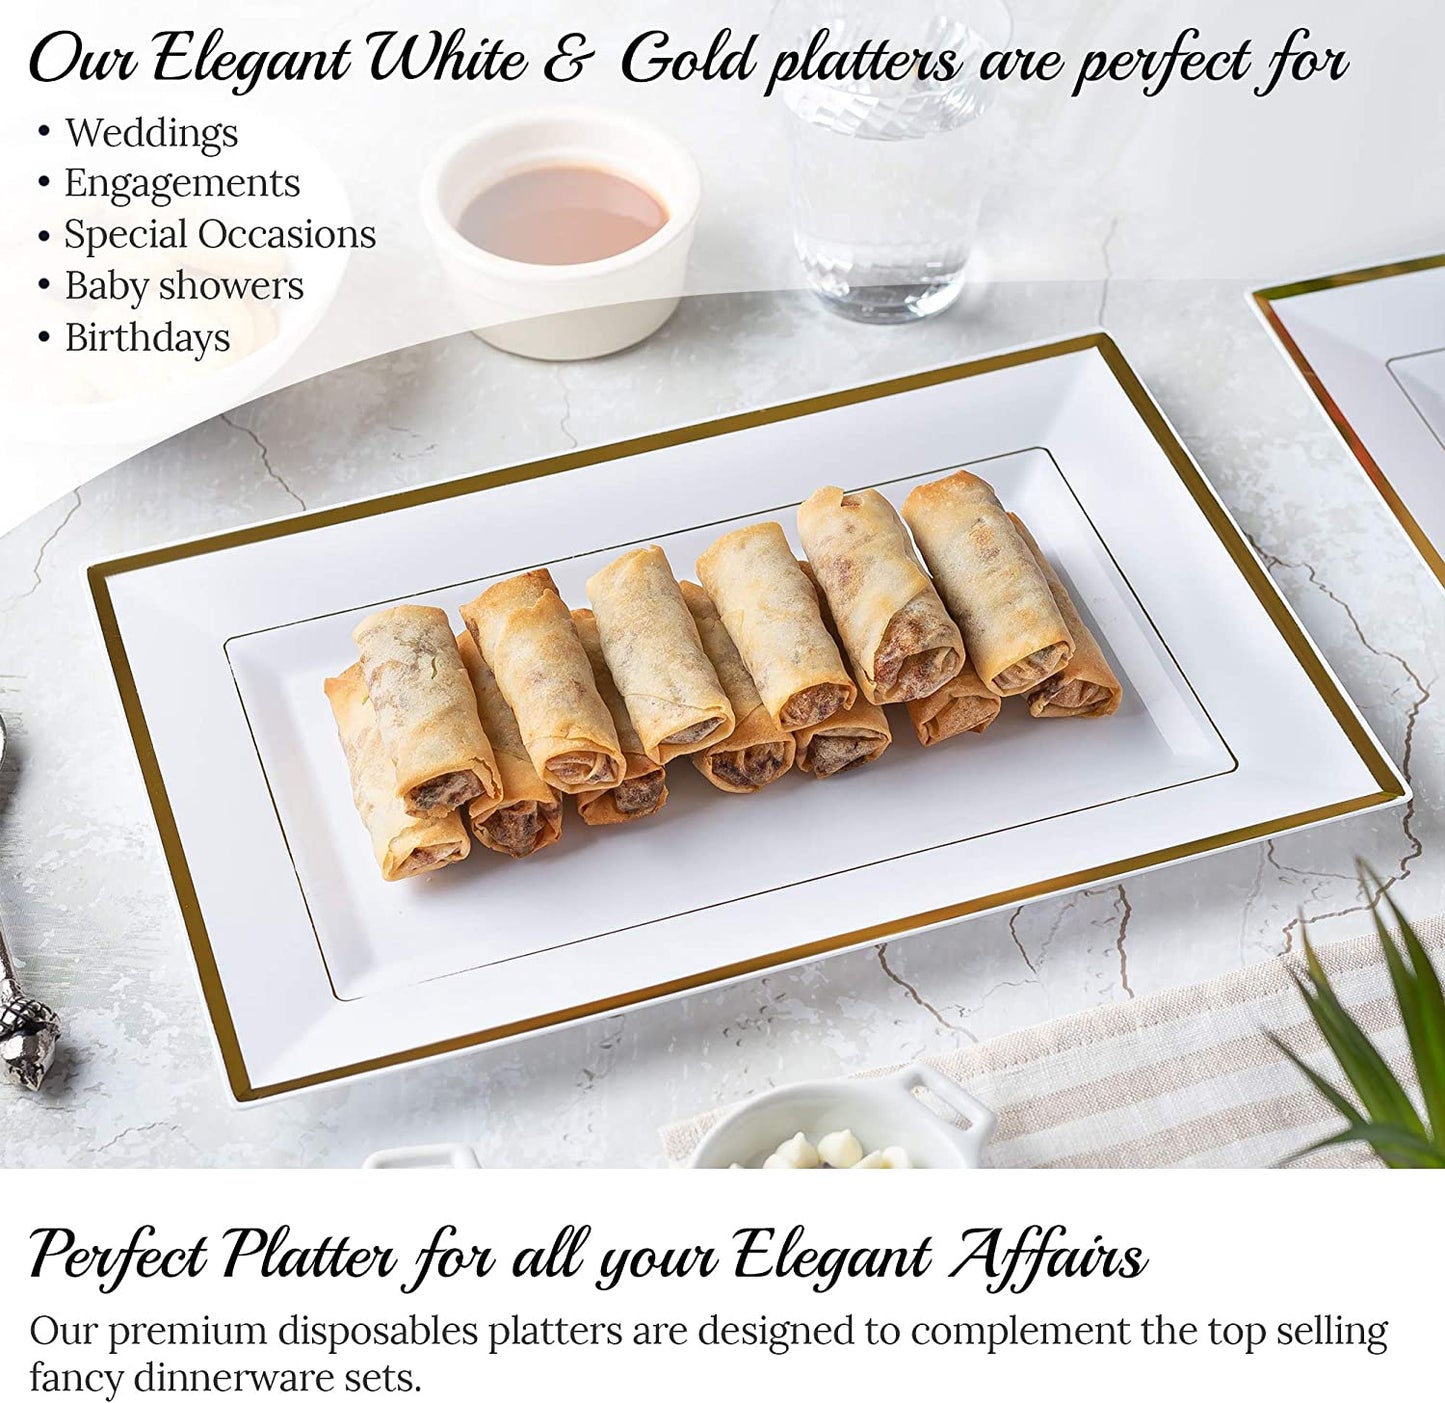 - Elegant Plastic Serving Tray & Platter Set (6Pk) - White & Gold Rim Disposable Serving Trays & Platters for Food - Weddings, Upscale Parties, Dessert Table, Cupcakes - 8 X 12.85 Inches